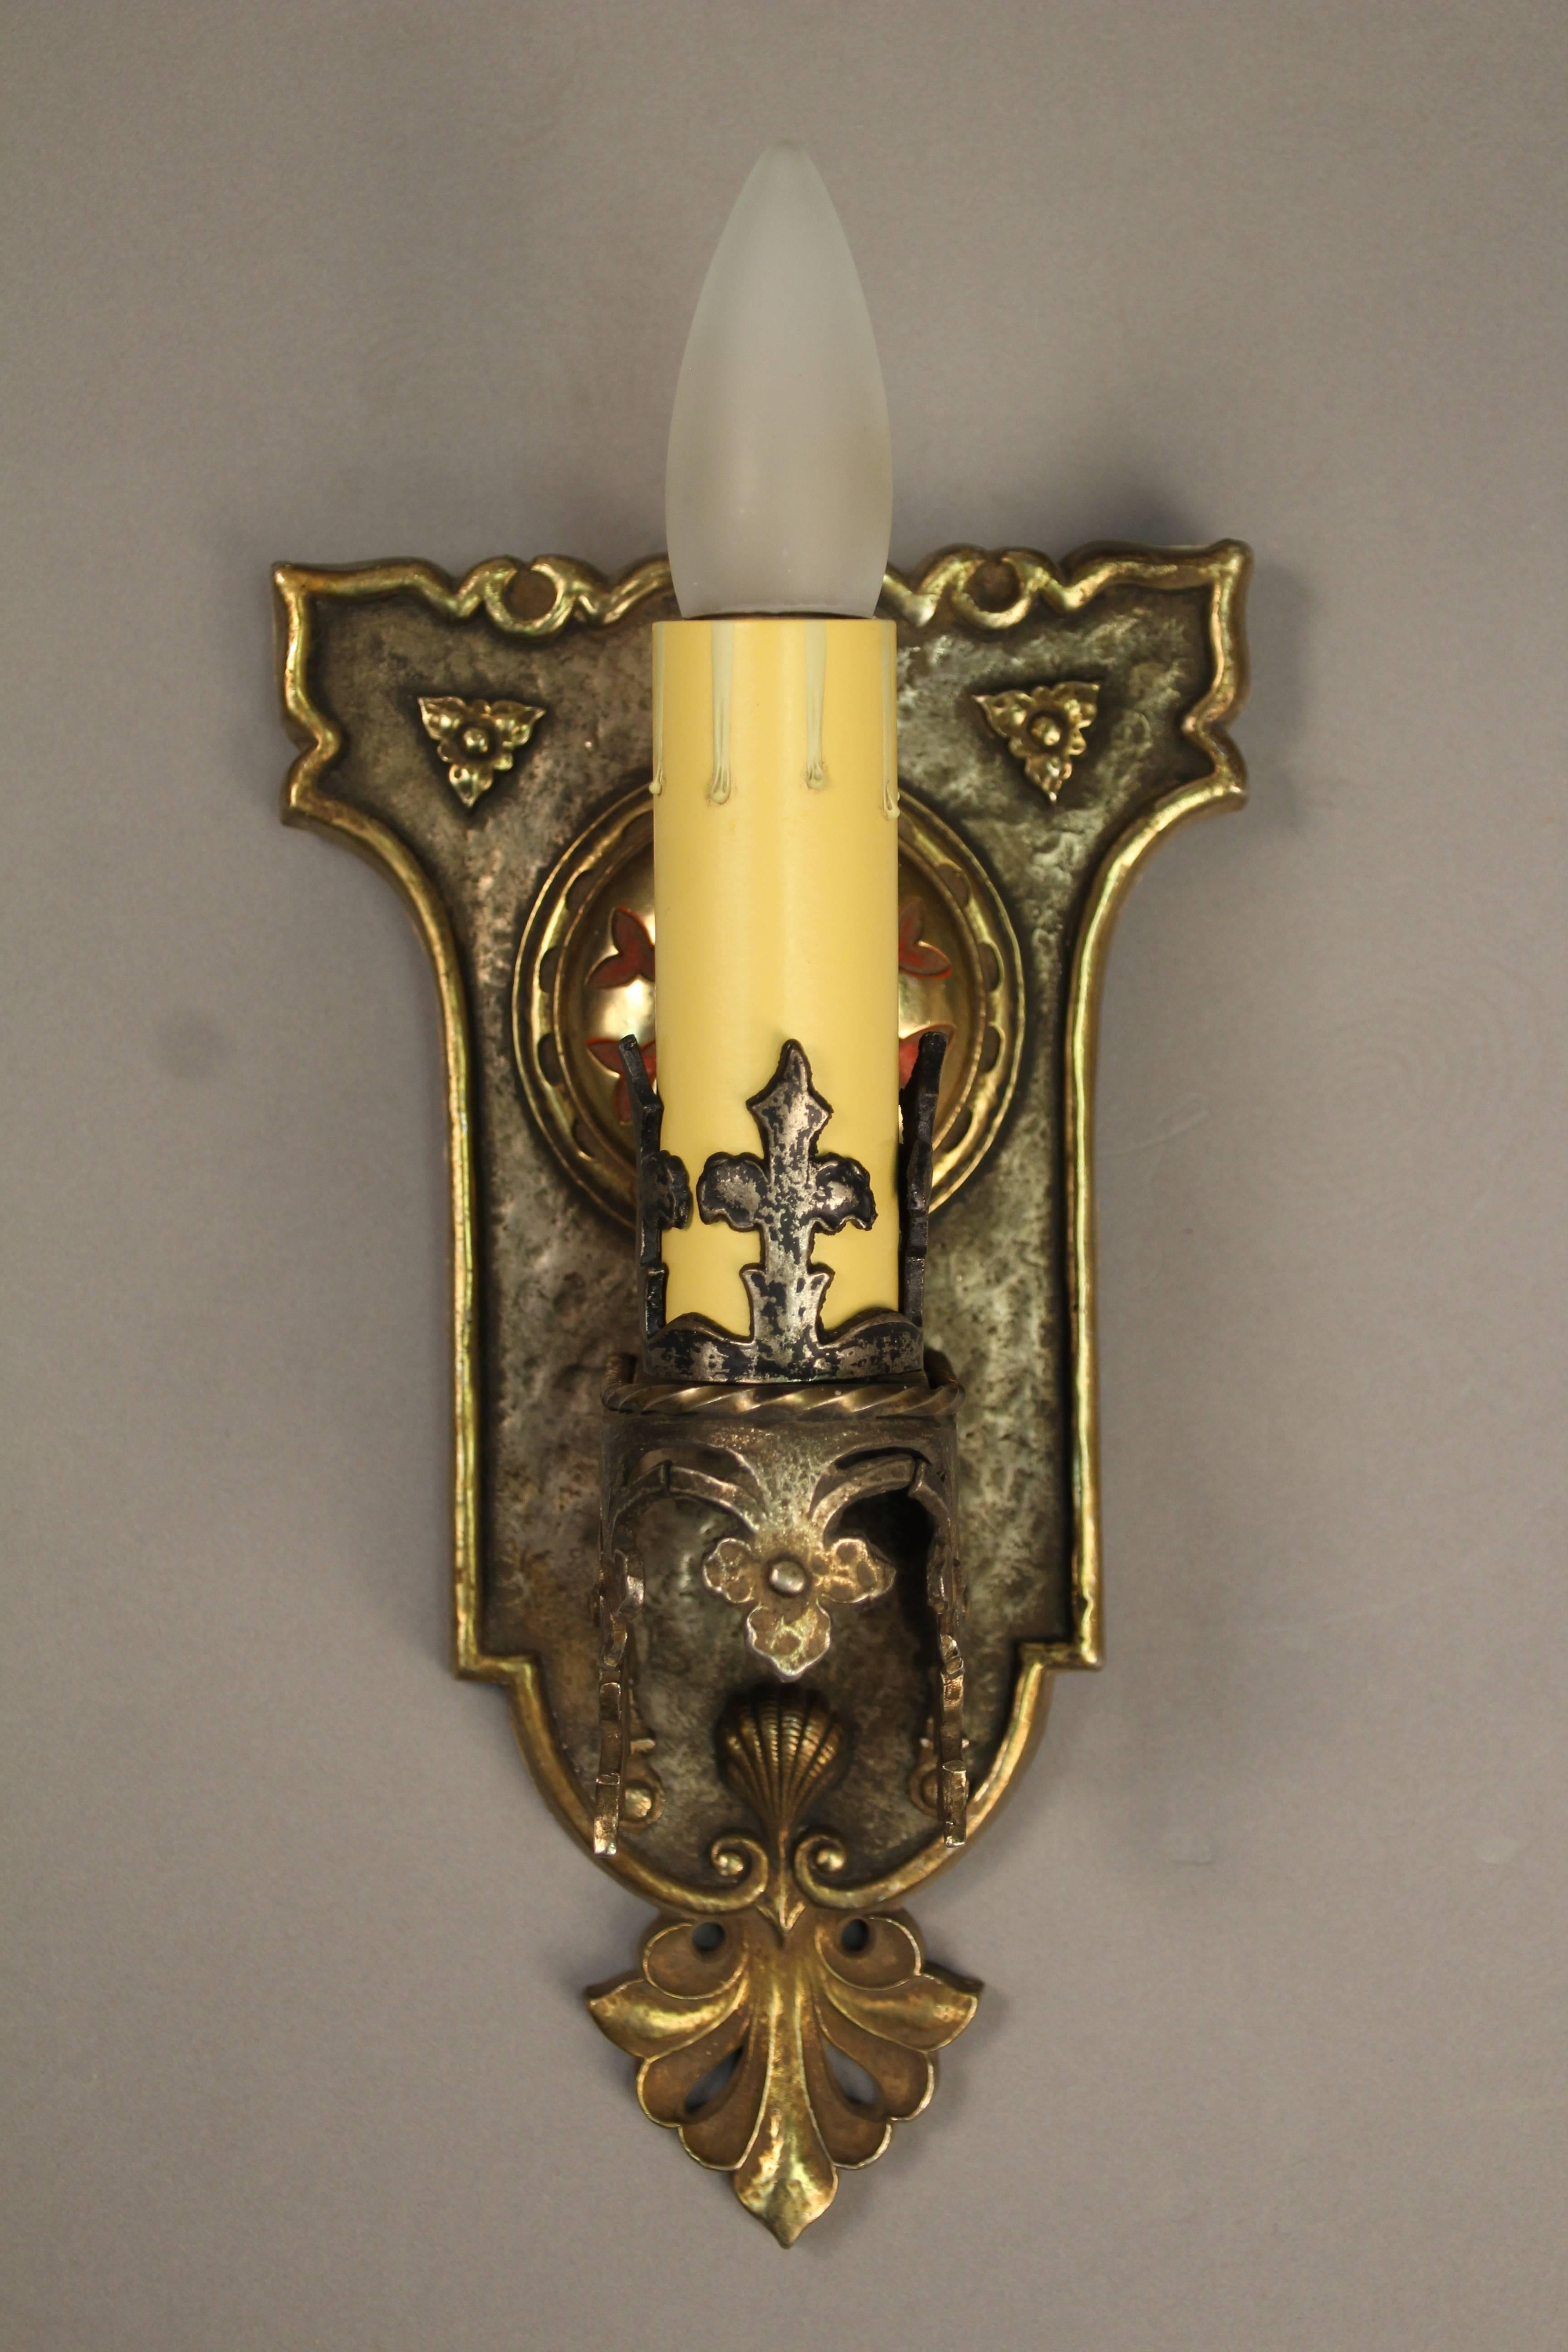 Single sconce, circa 1920s with gold and polychrome finish.